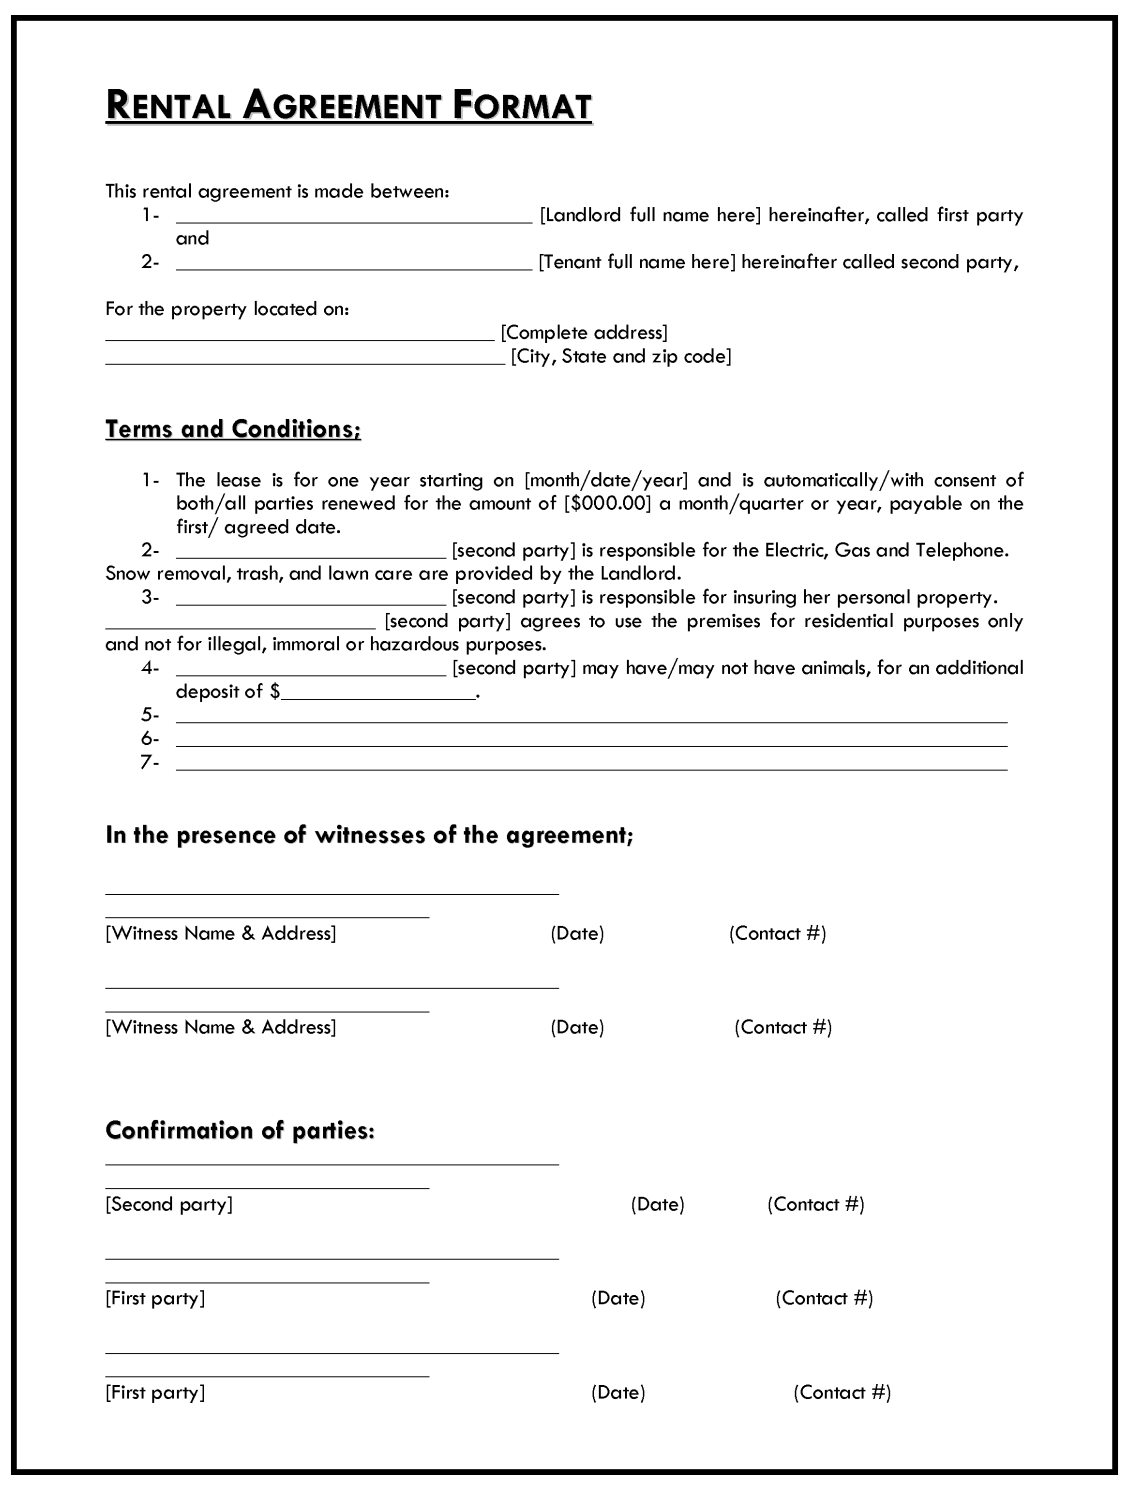 Rental Agreement In English Format